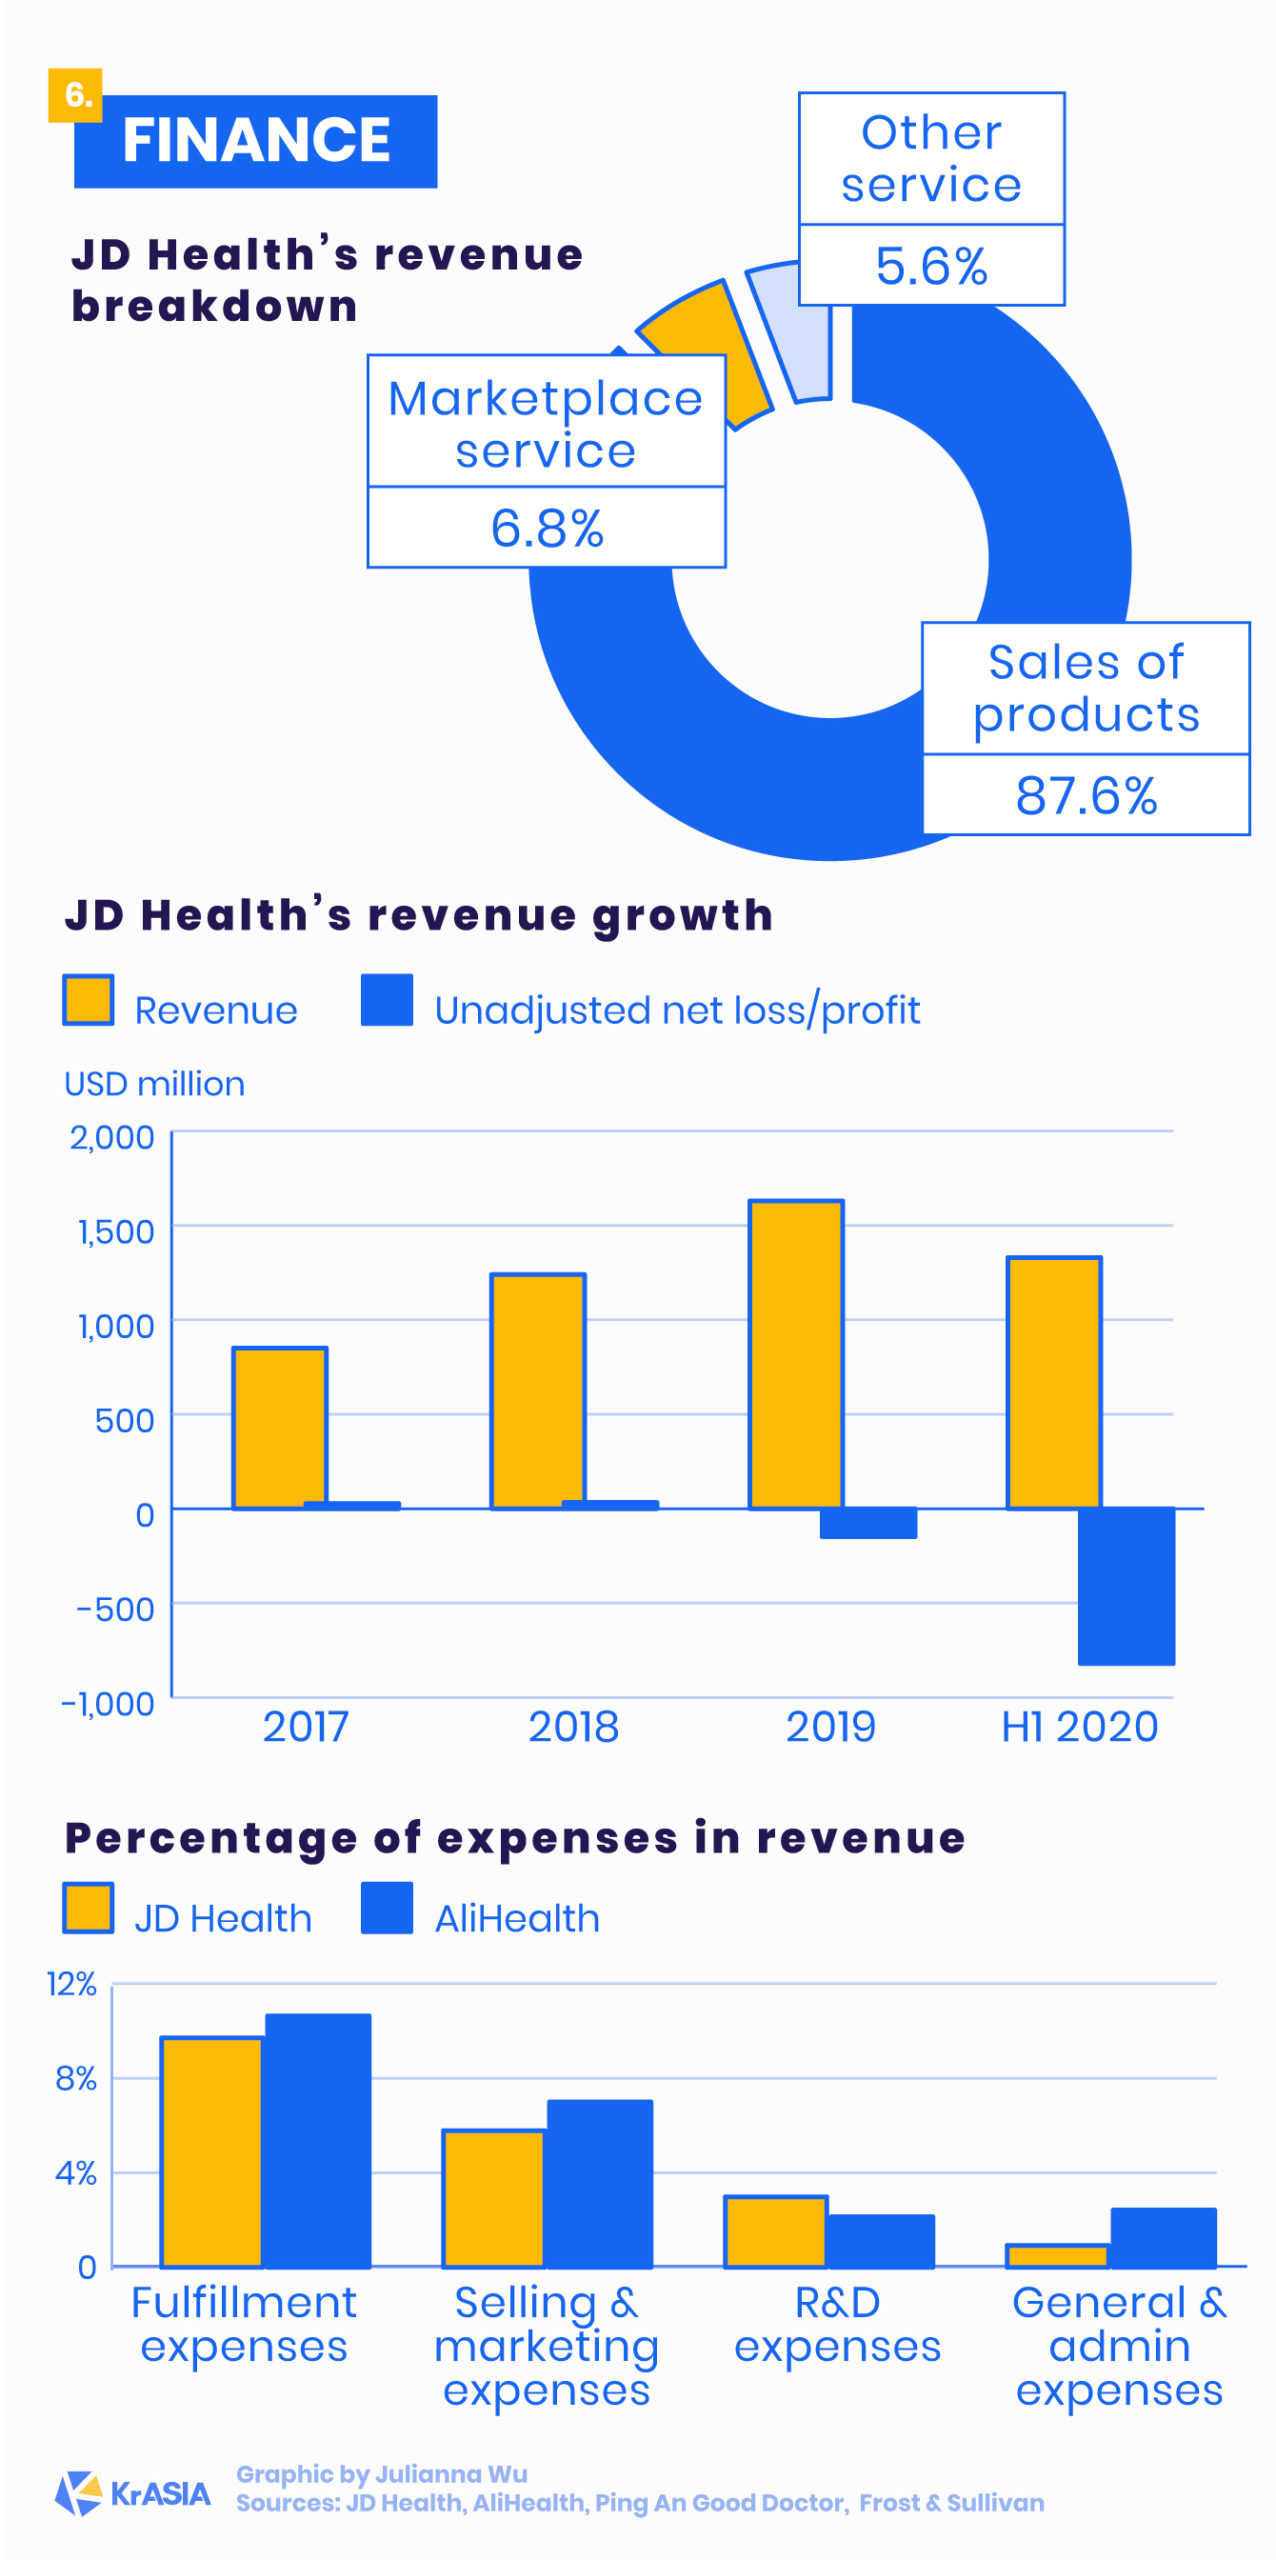 Financial performance of JD Health